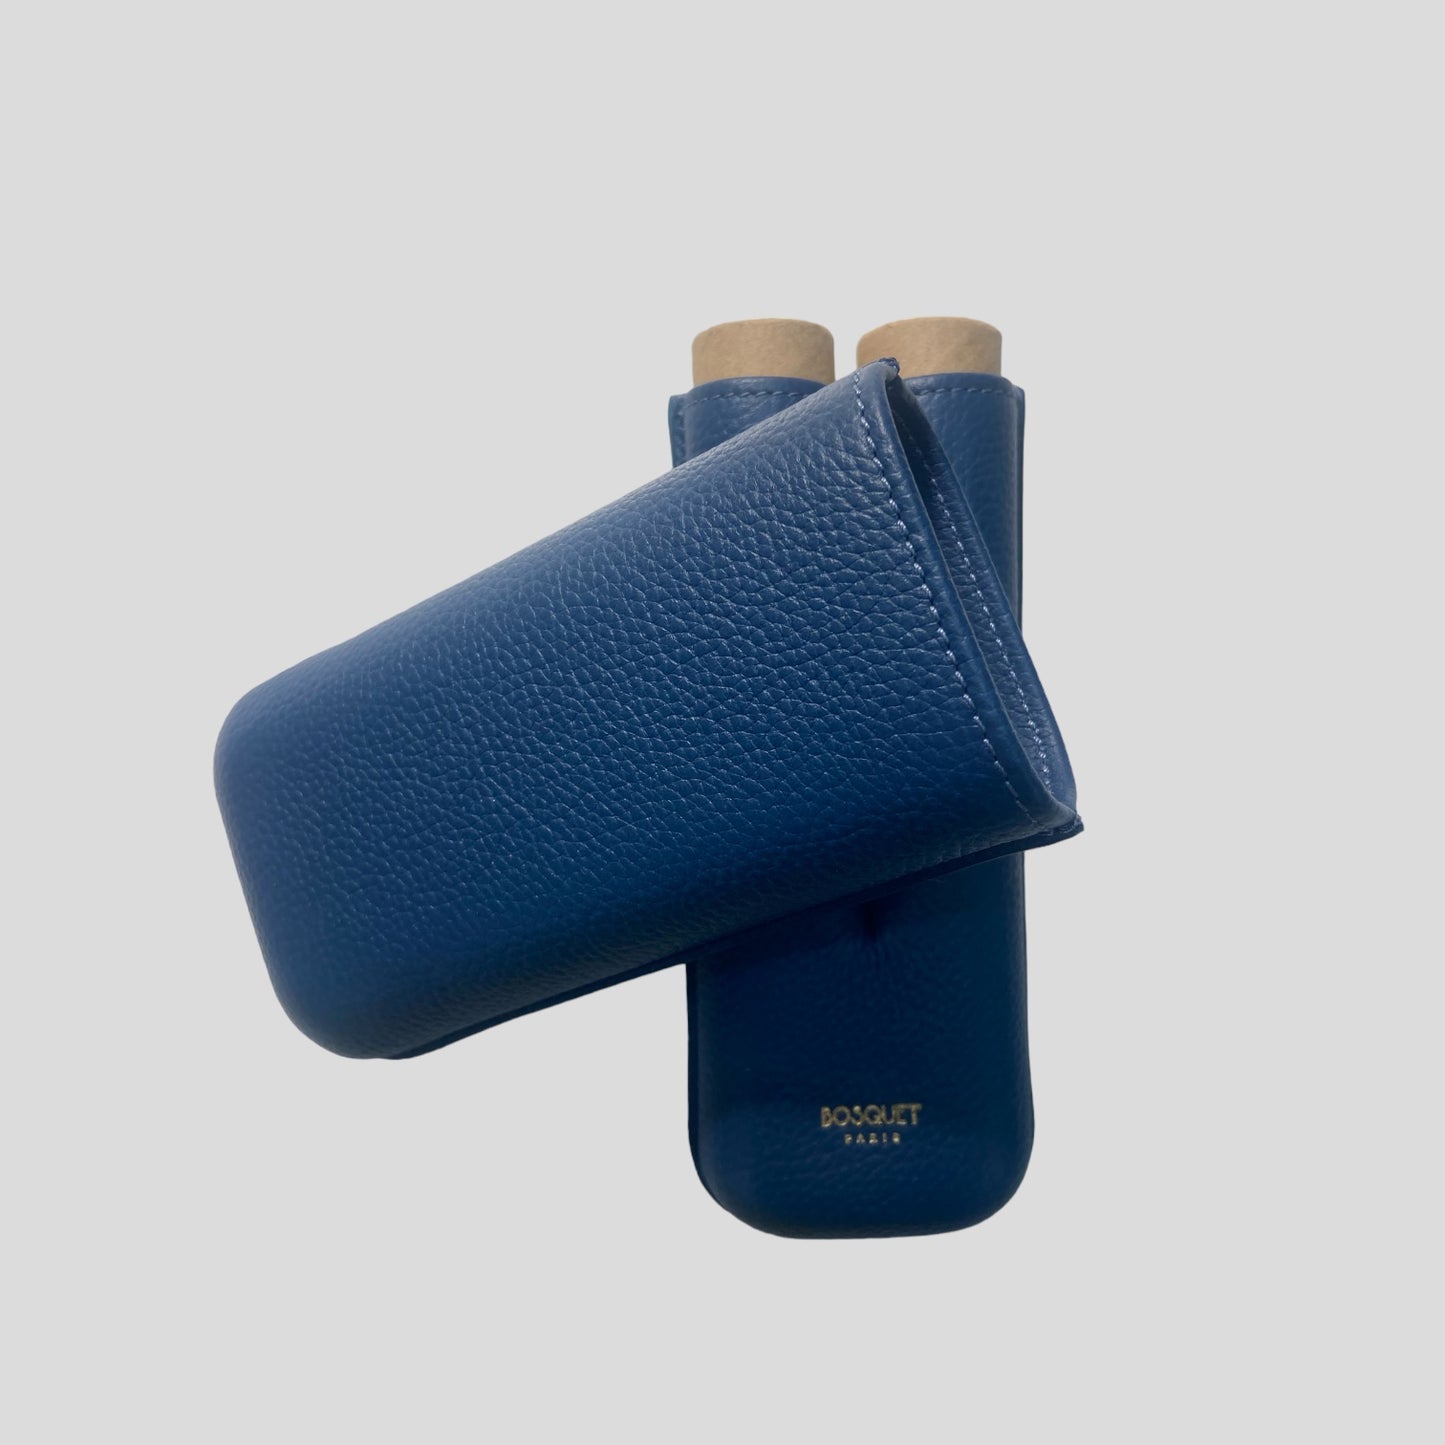 Grained Calf Leather Case For 2 -  Blue Lapis